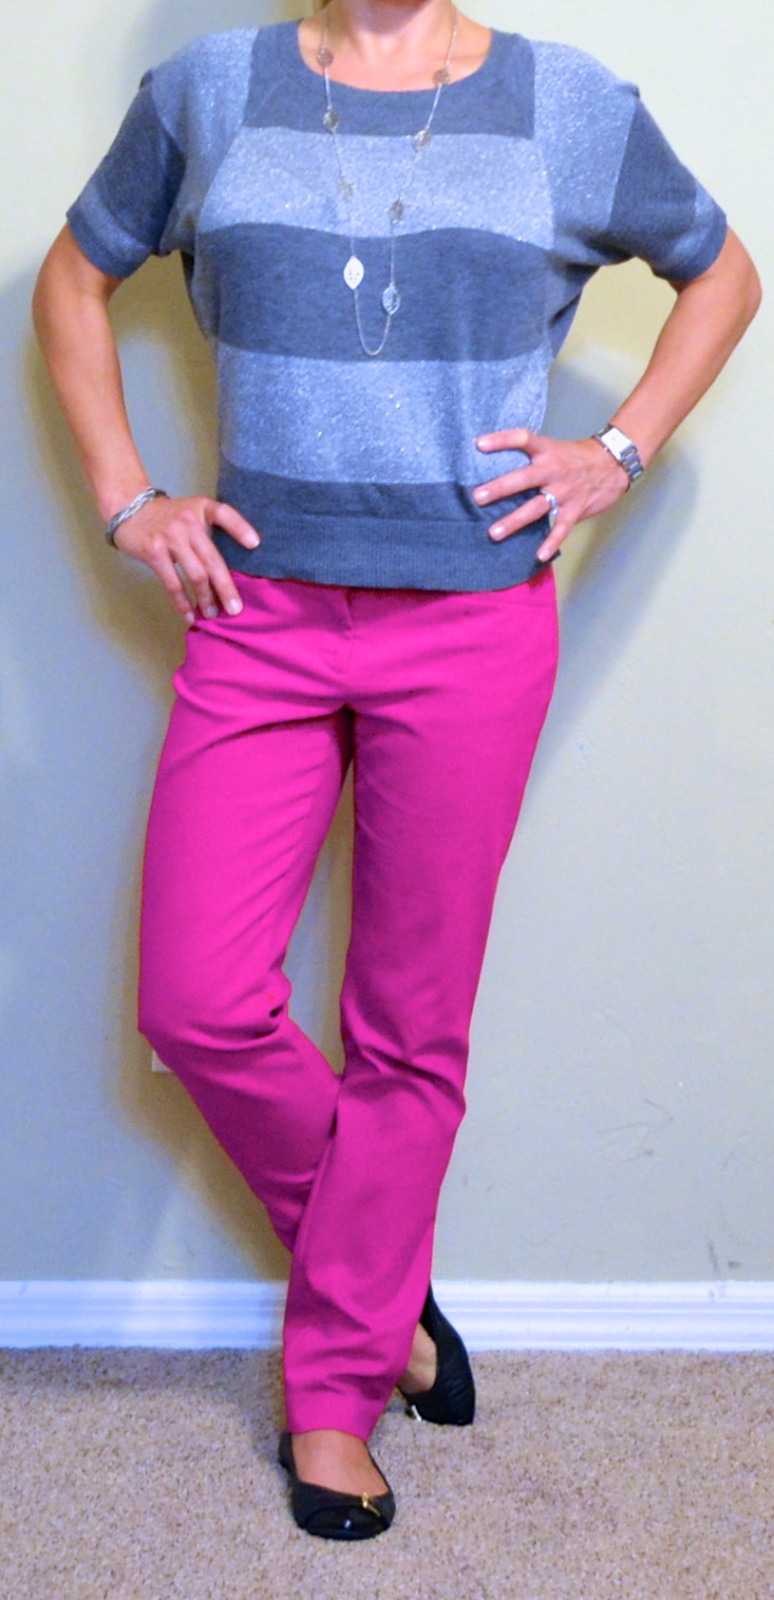 guest post - v: striped grey & silver top, fuchsia pants | Outfit Posts